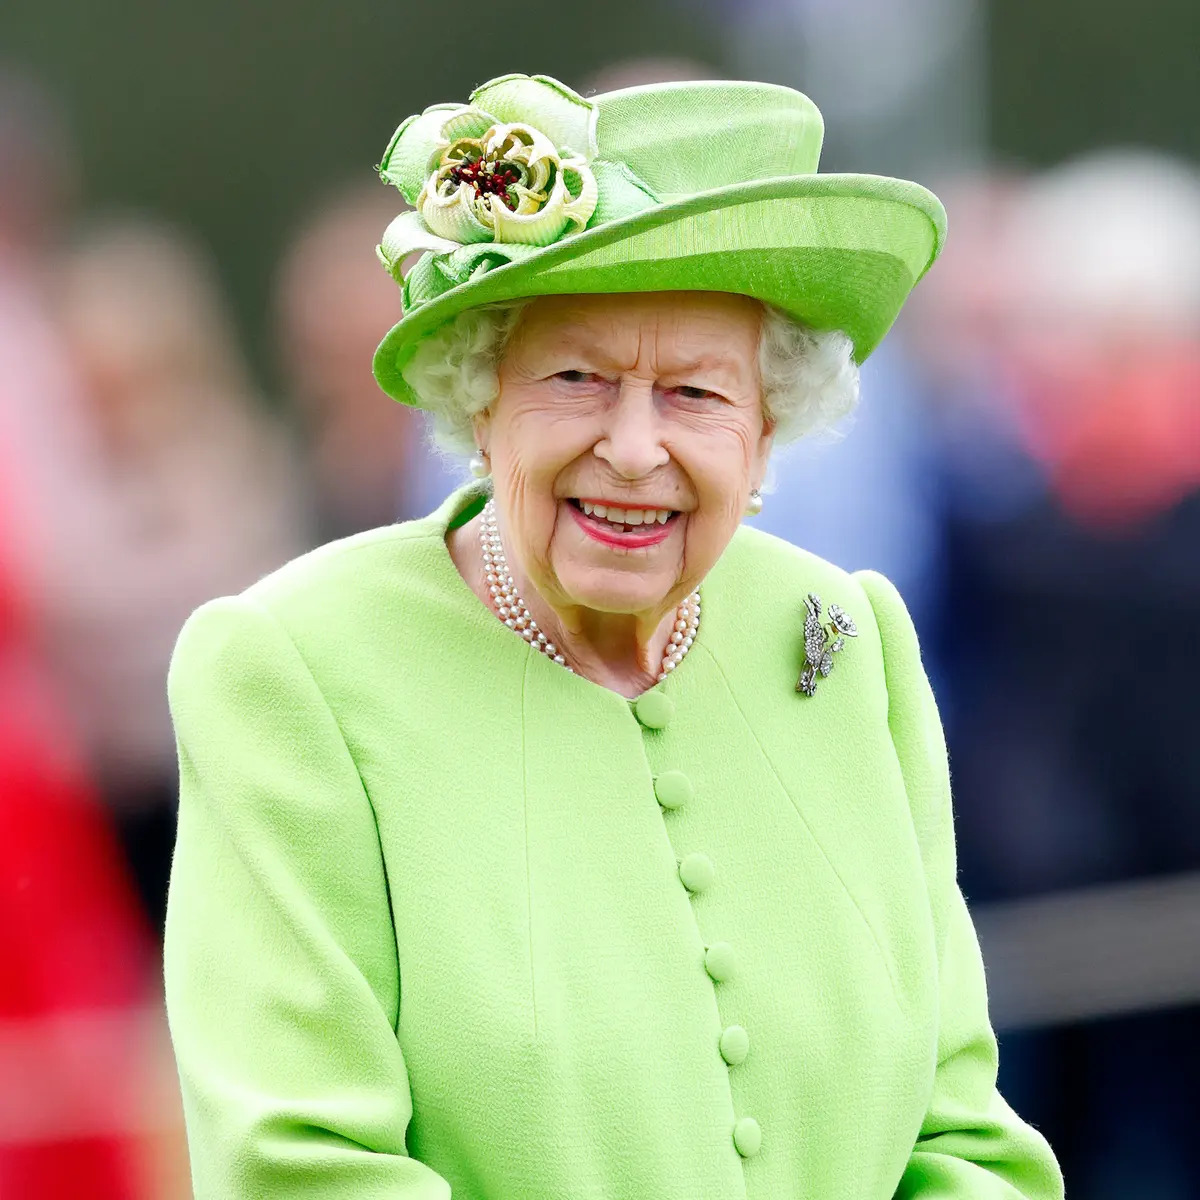 Queen Elizabeth wearing a yellow green outfit during her Platinum Jubilee celebration